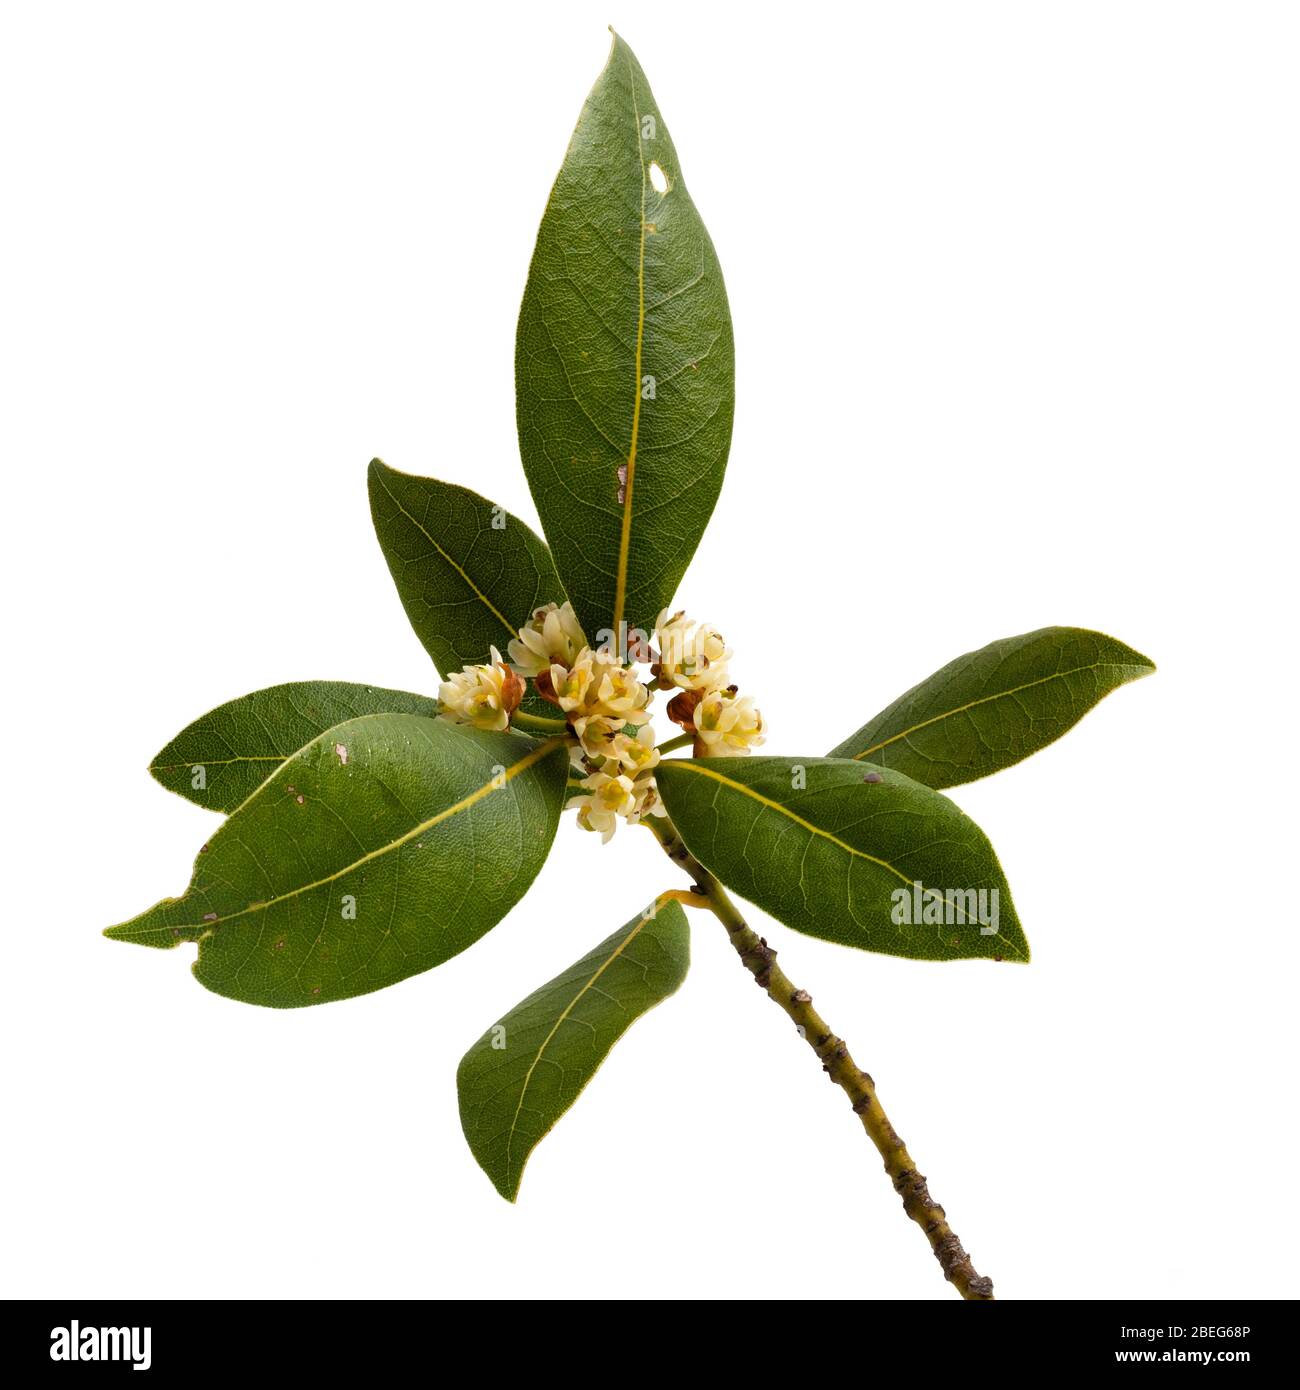 Spring flowers and fo;iage of the evergreen bay tree culinary herb, Laurus nobilis, on a white background Stock Photo